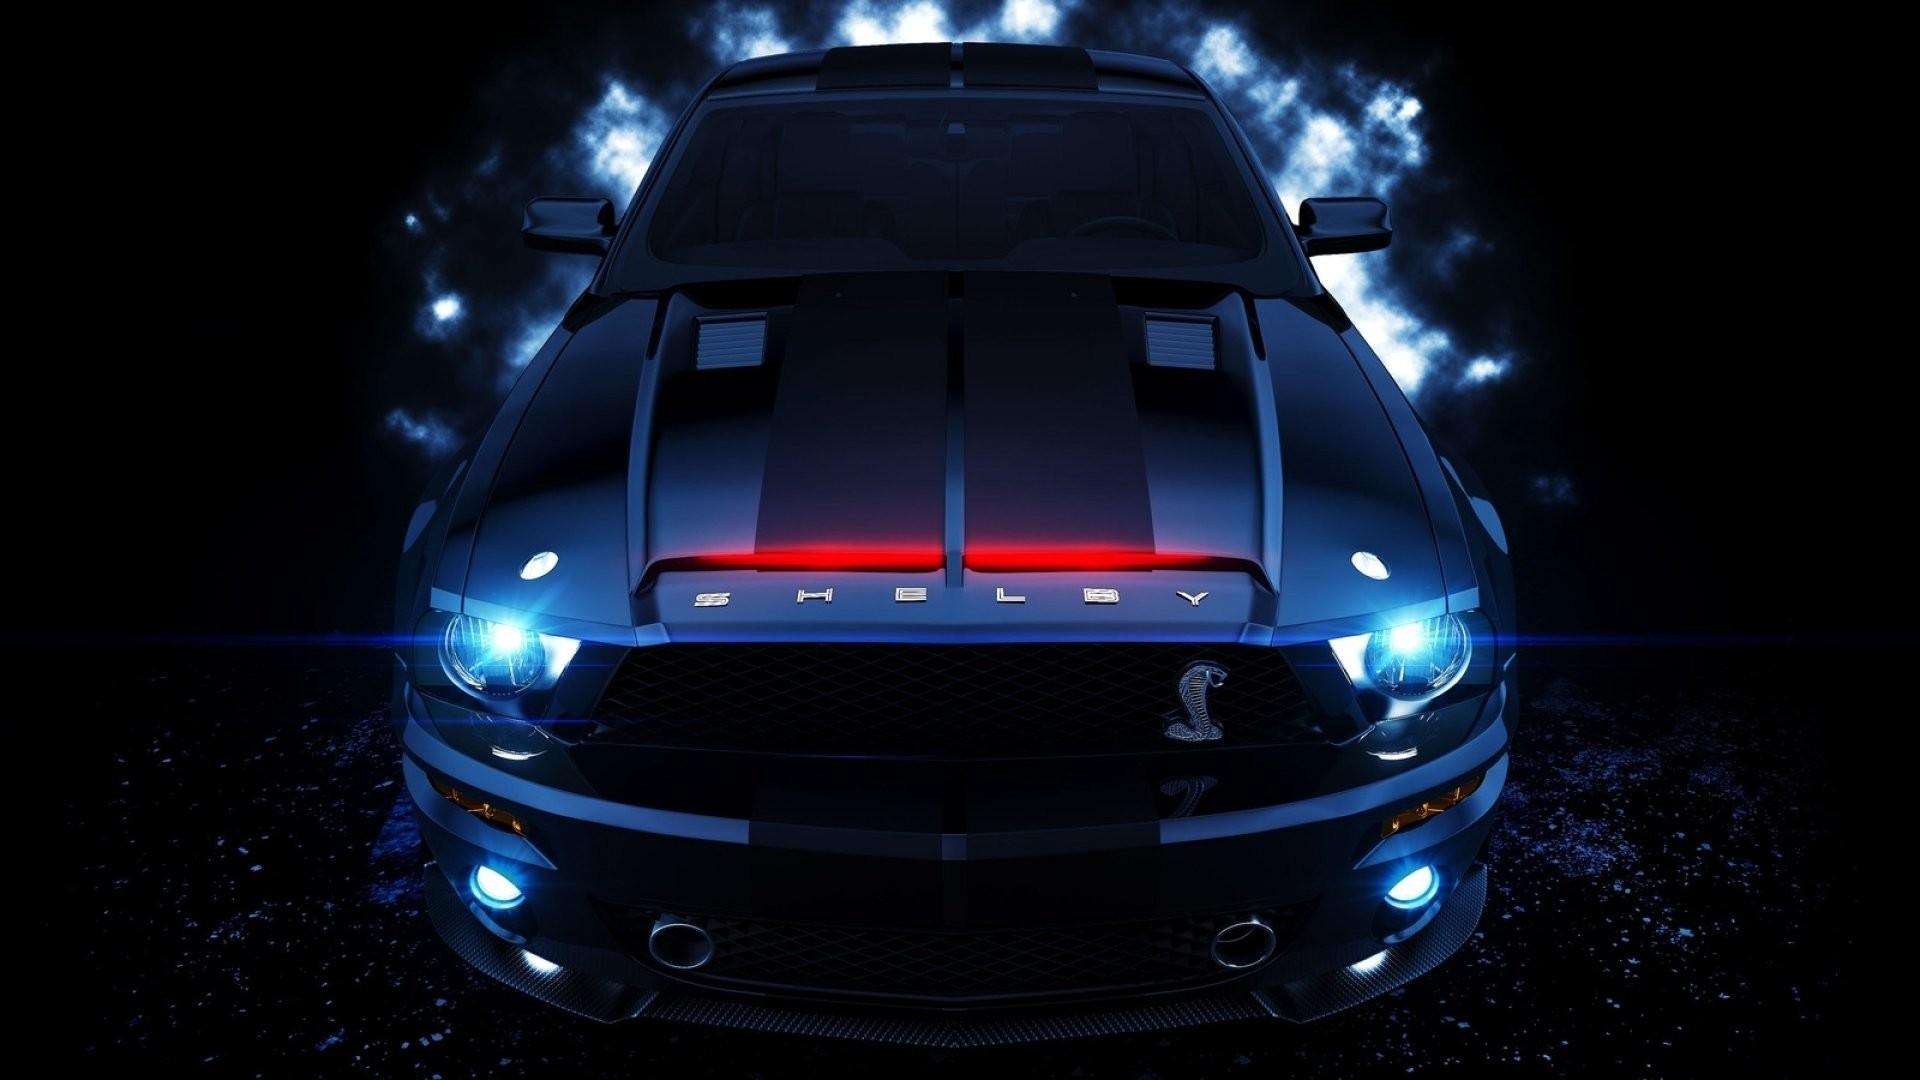 78+ Shelby Mustang Wallpapers